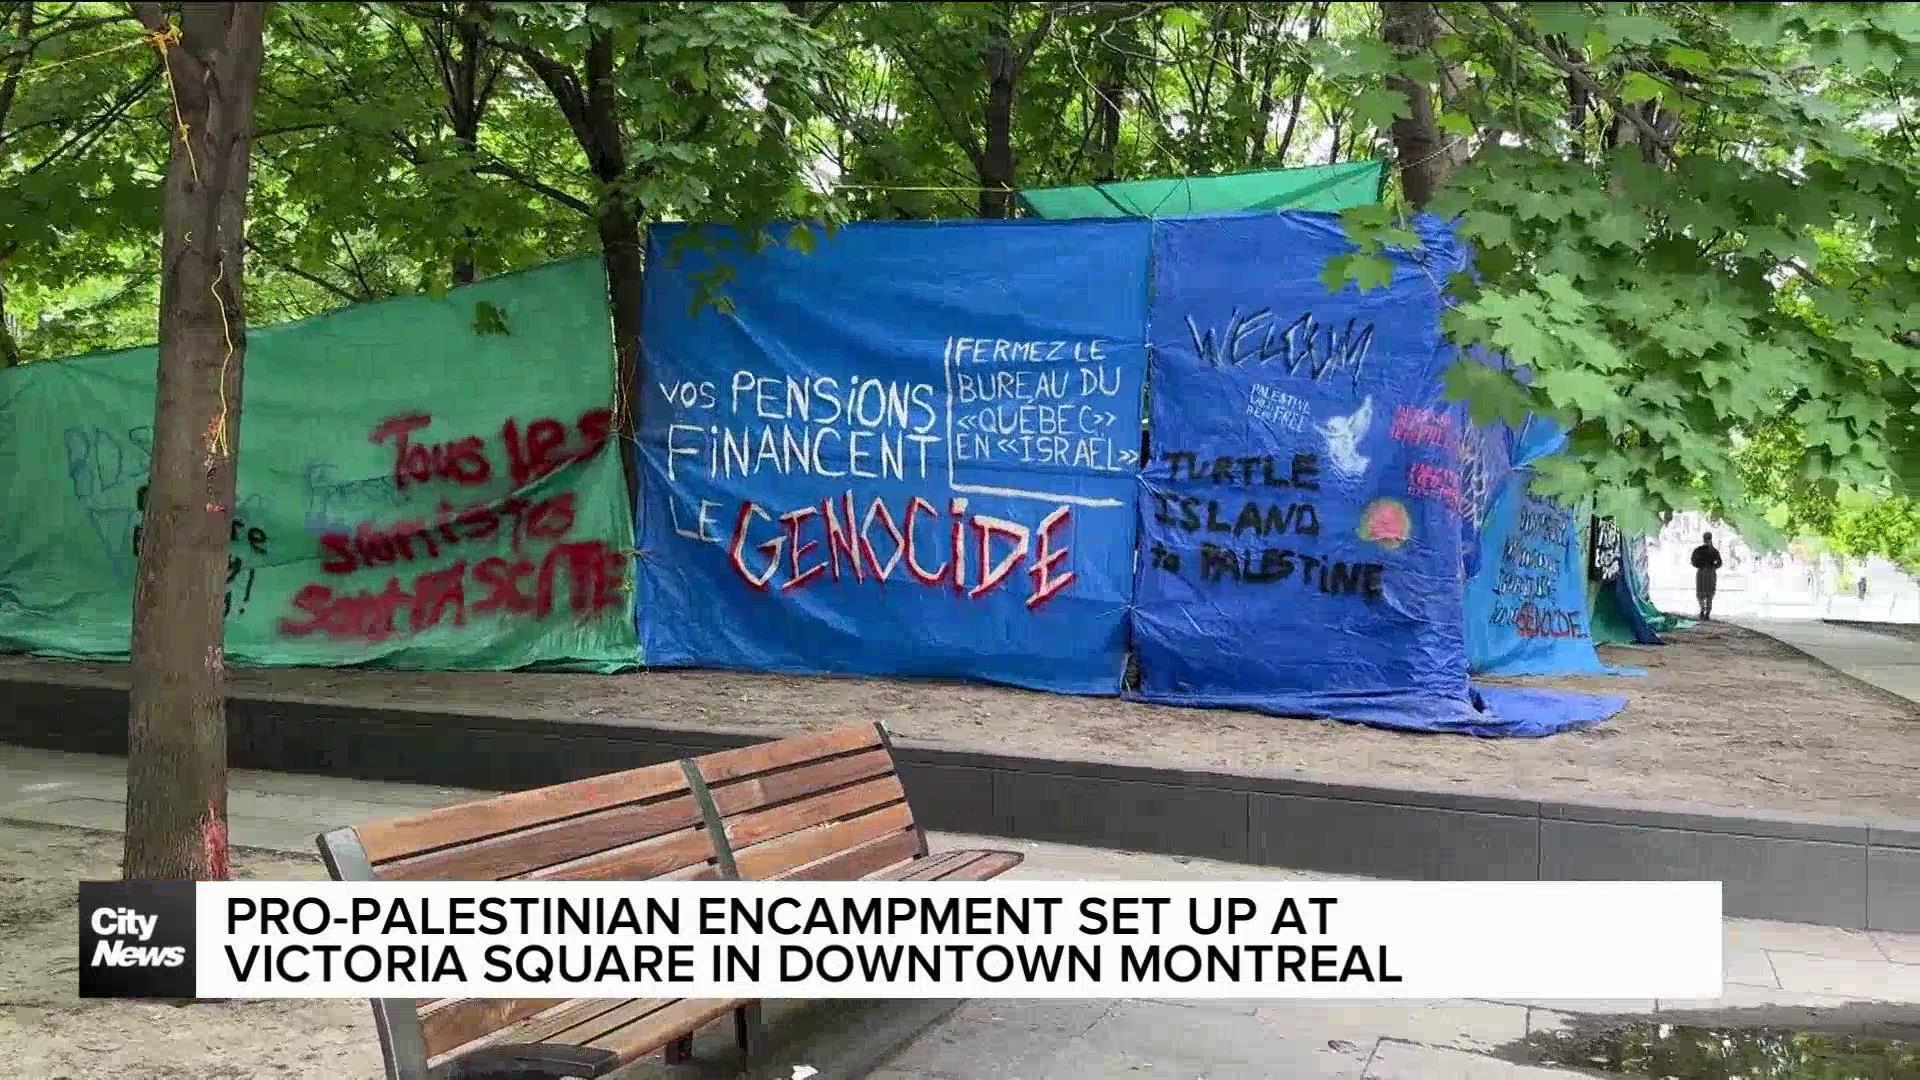 Pro-Palestinian encampment at Victoria Square in Montreal